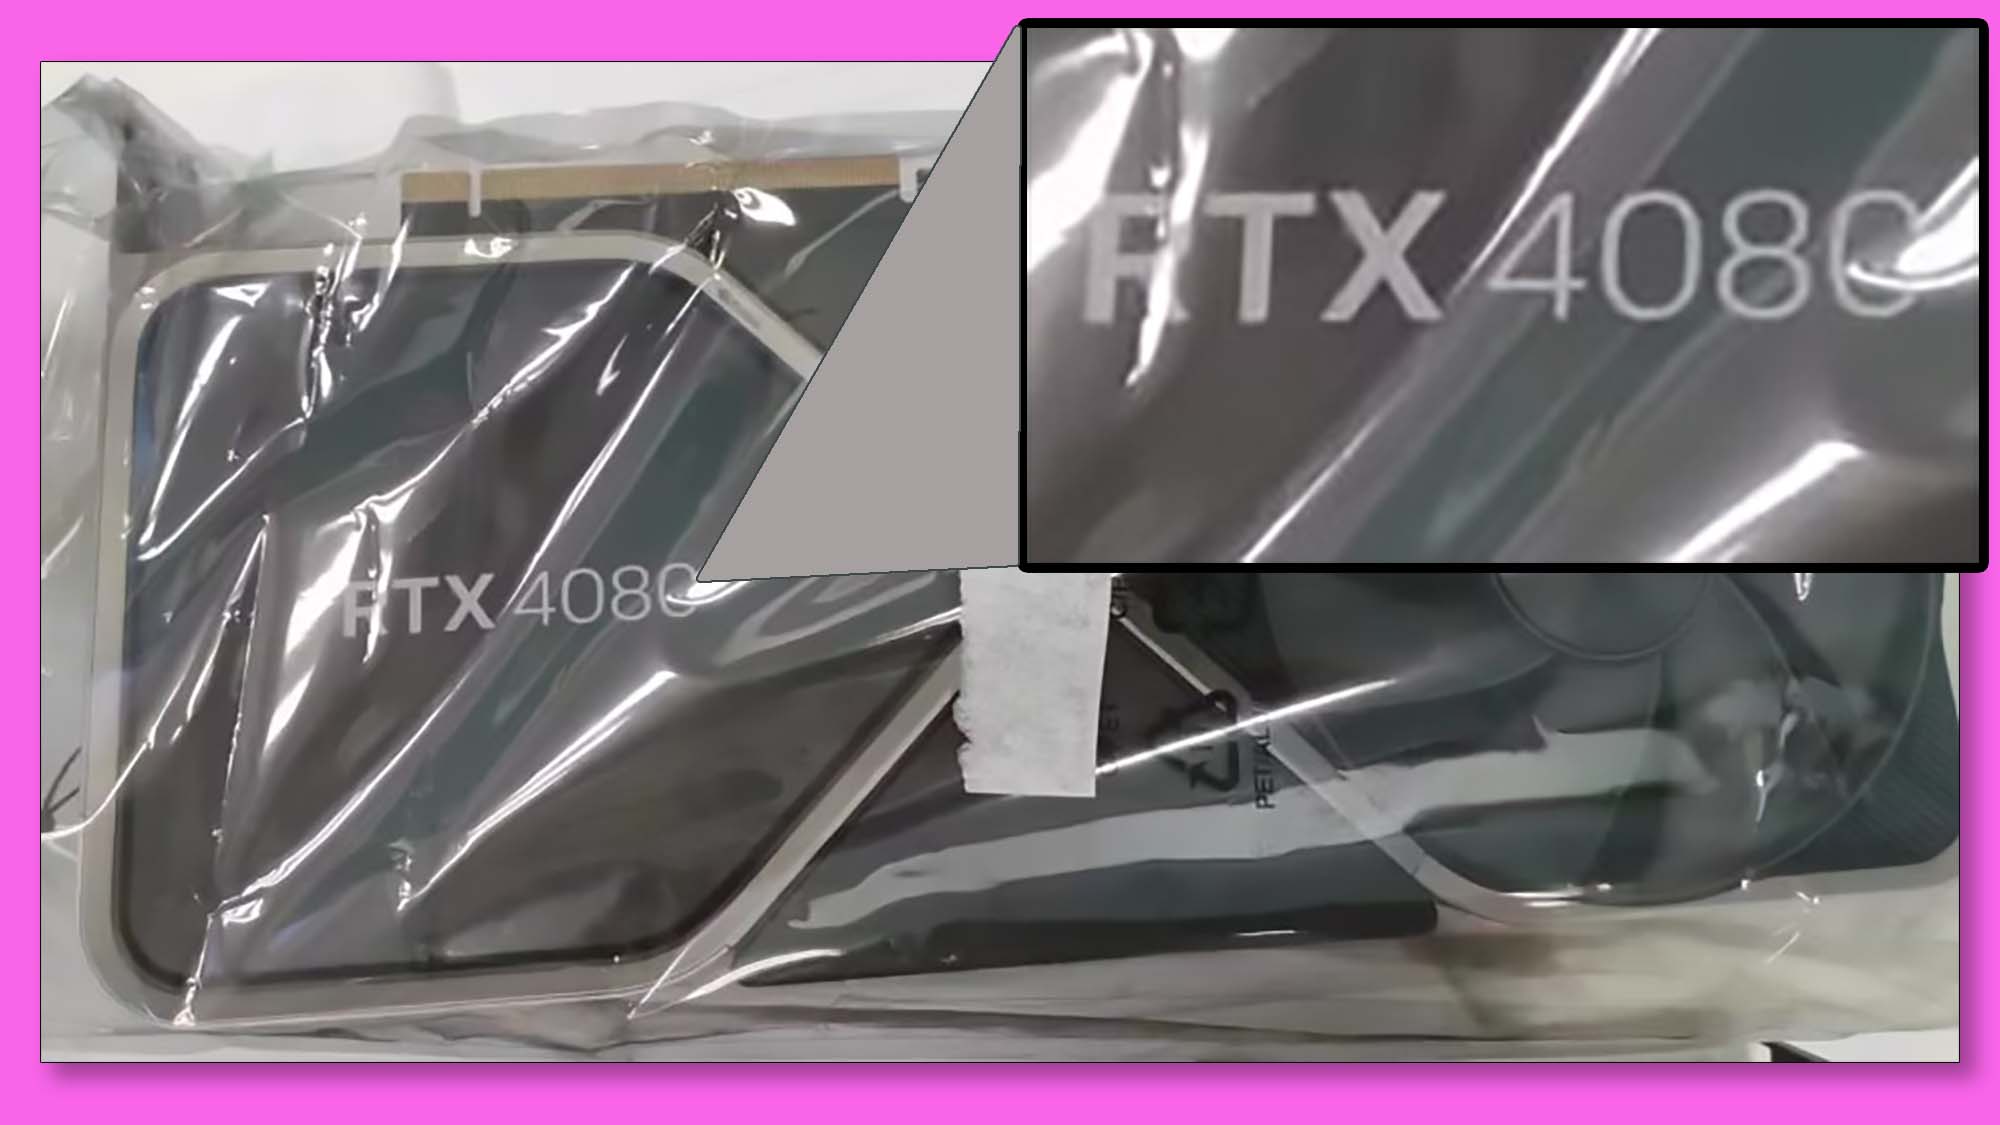 A purported RTX 4080 in its packaging, with a highlight of the thinner numbers on the card